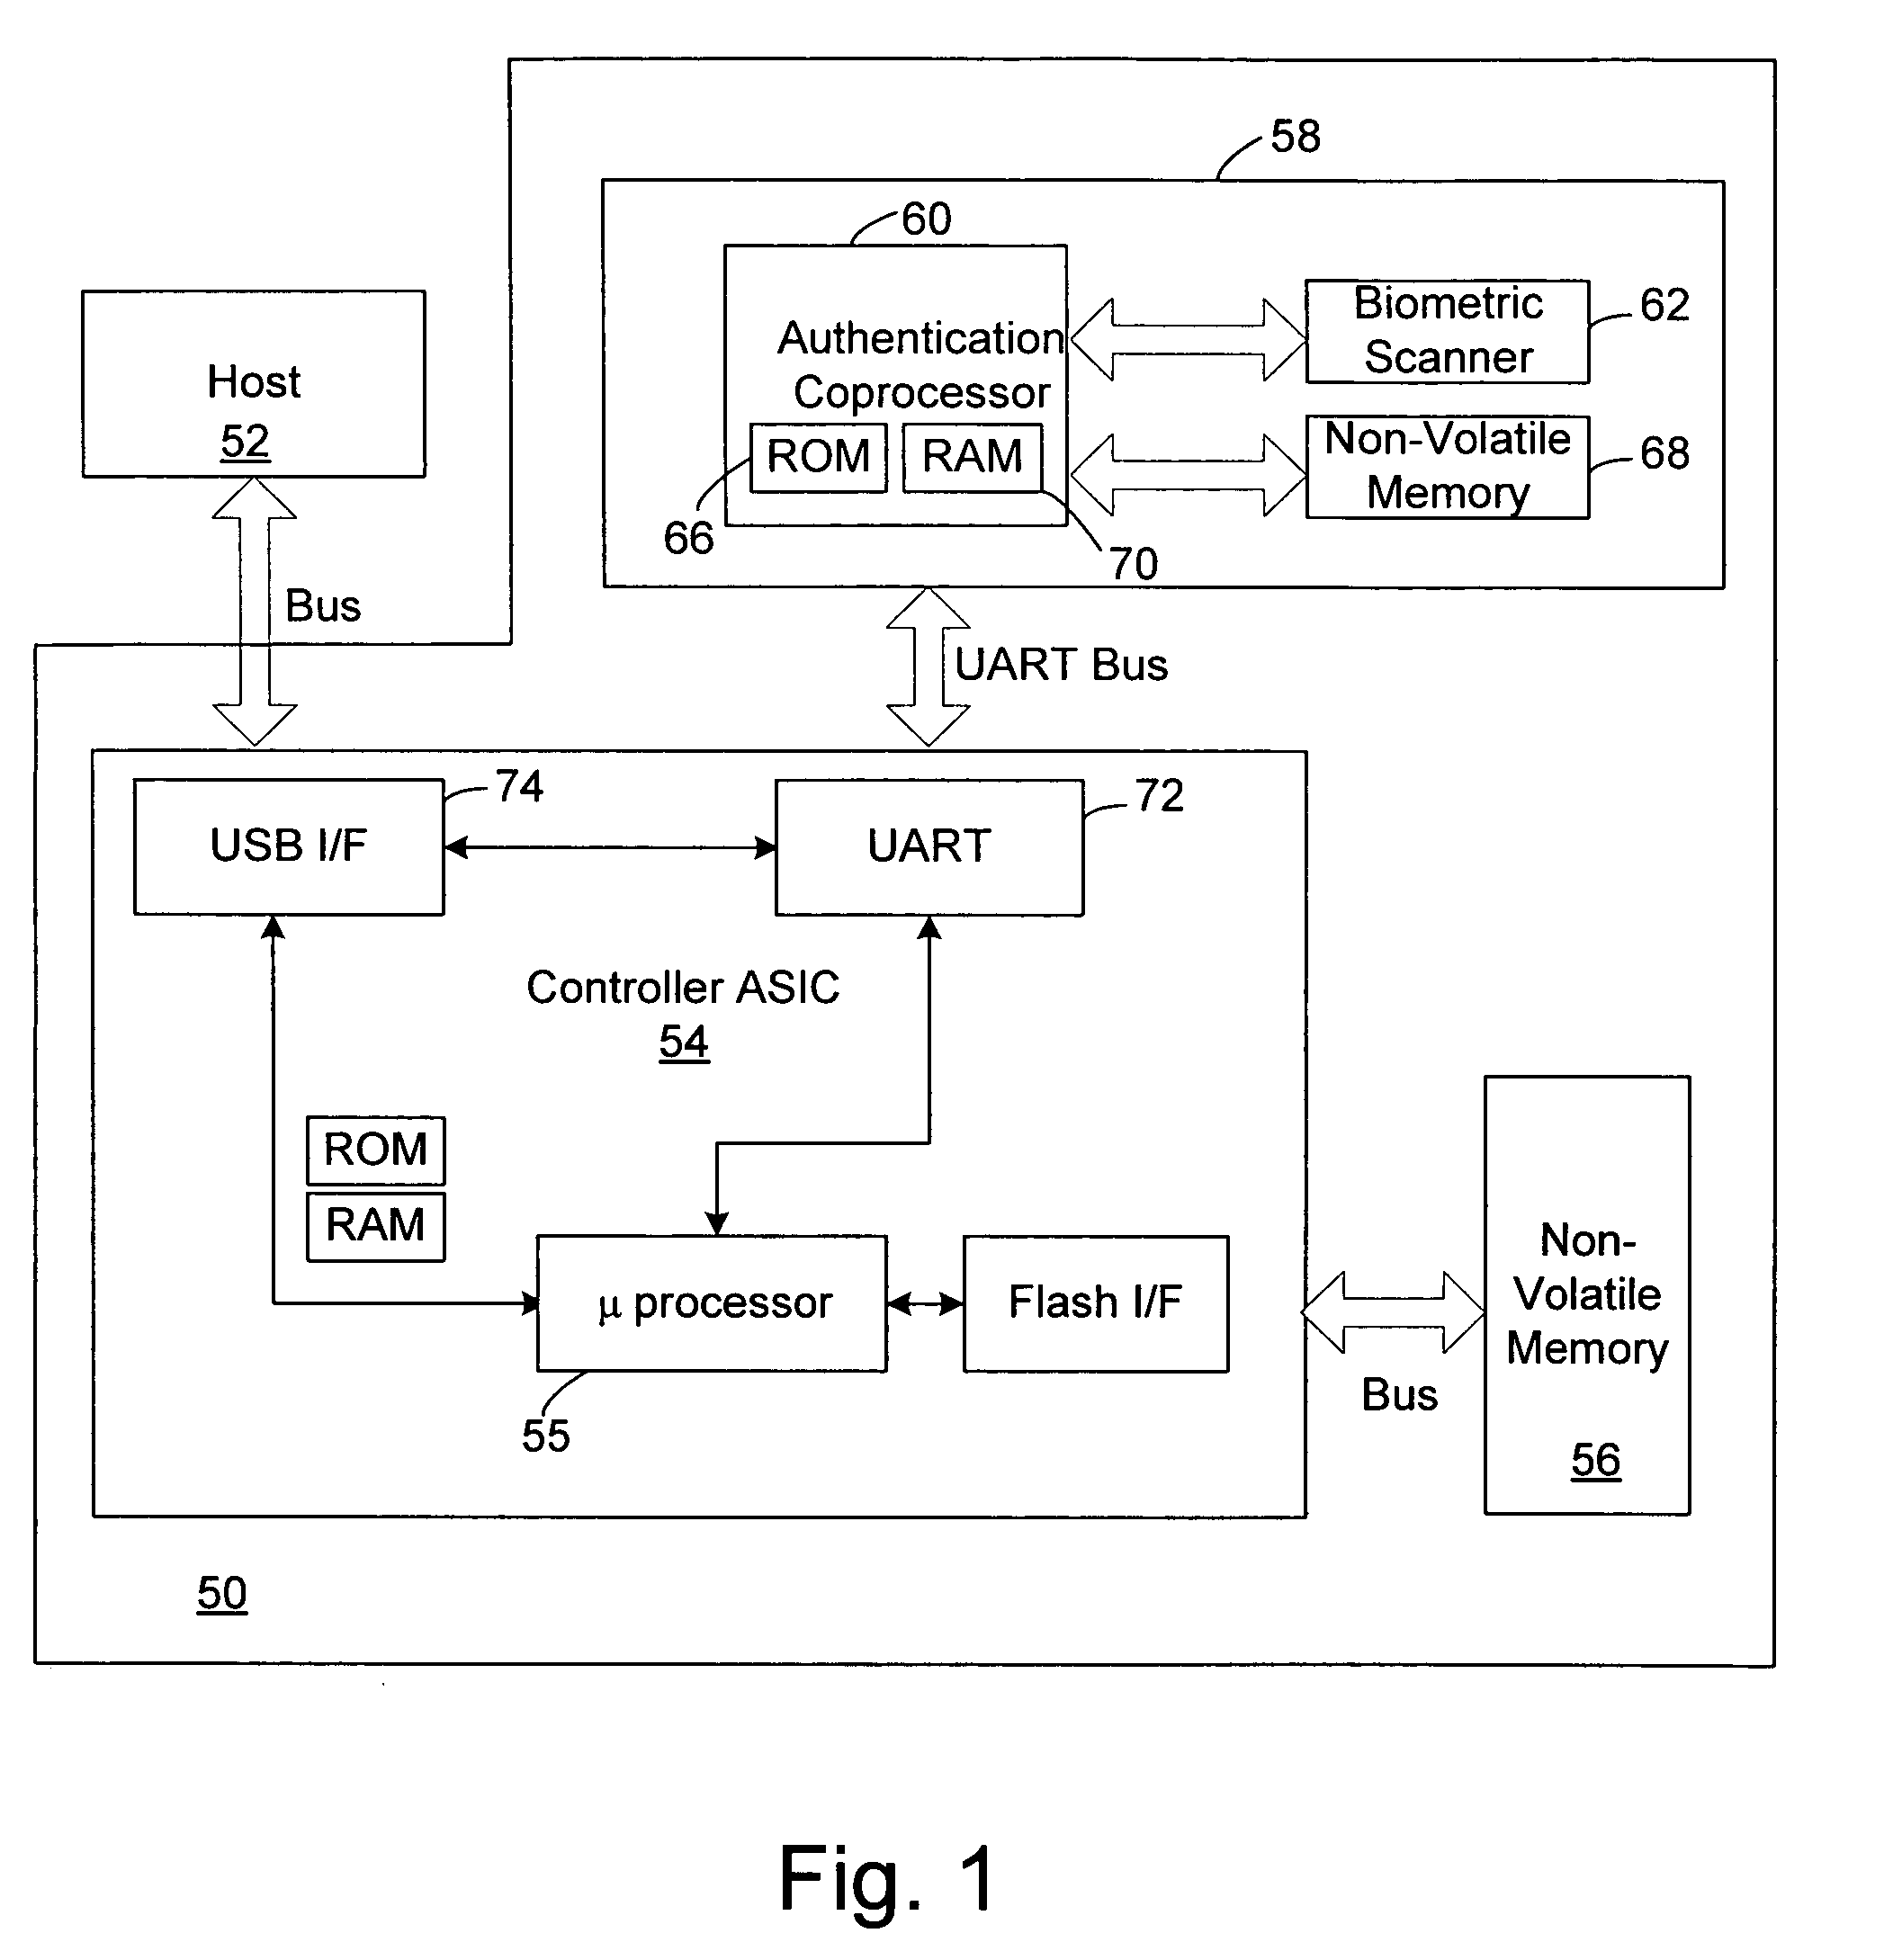 Portable memory storage device with biometric identification security